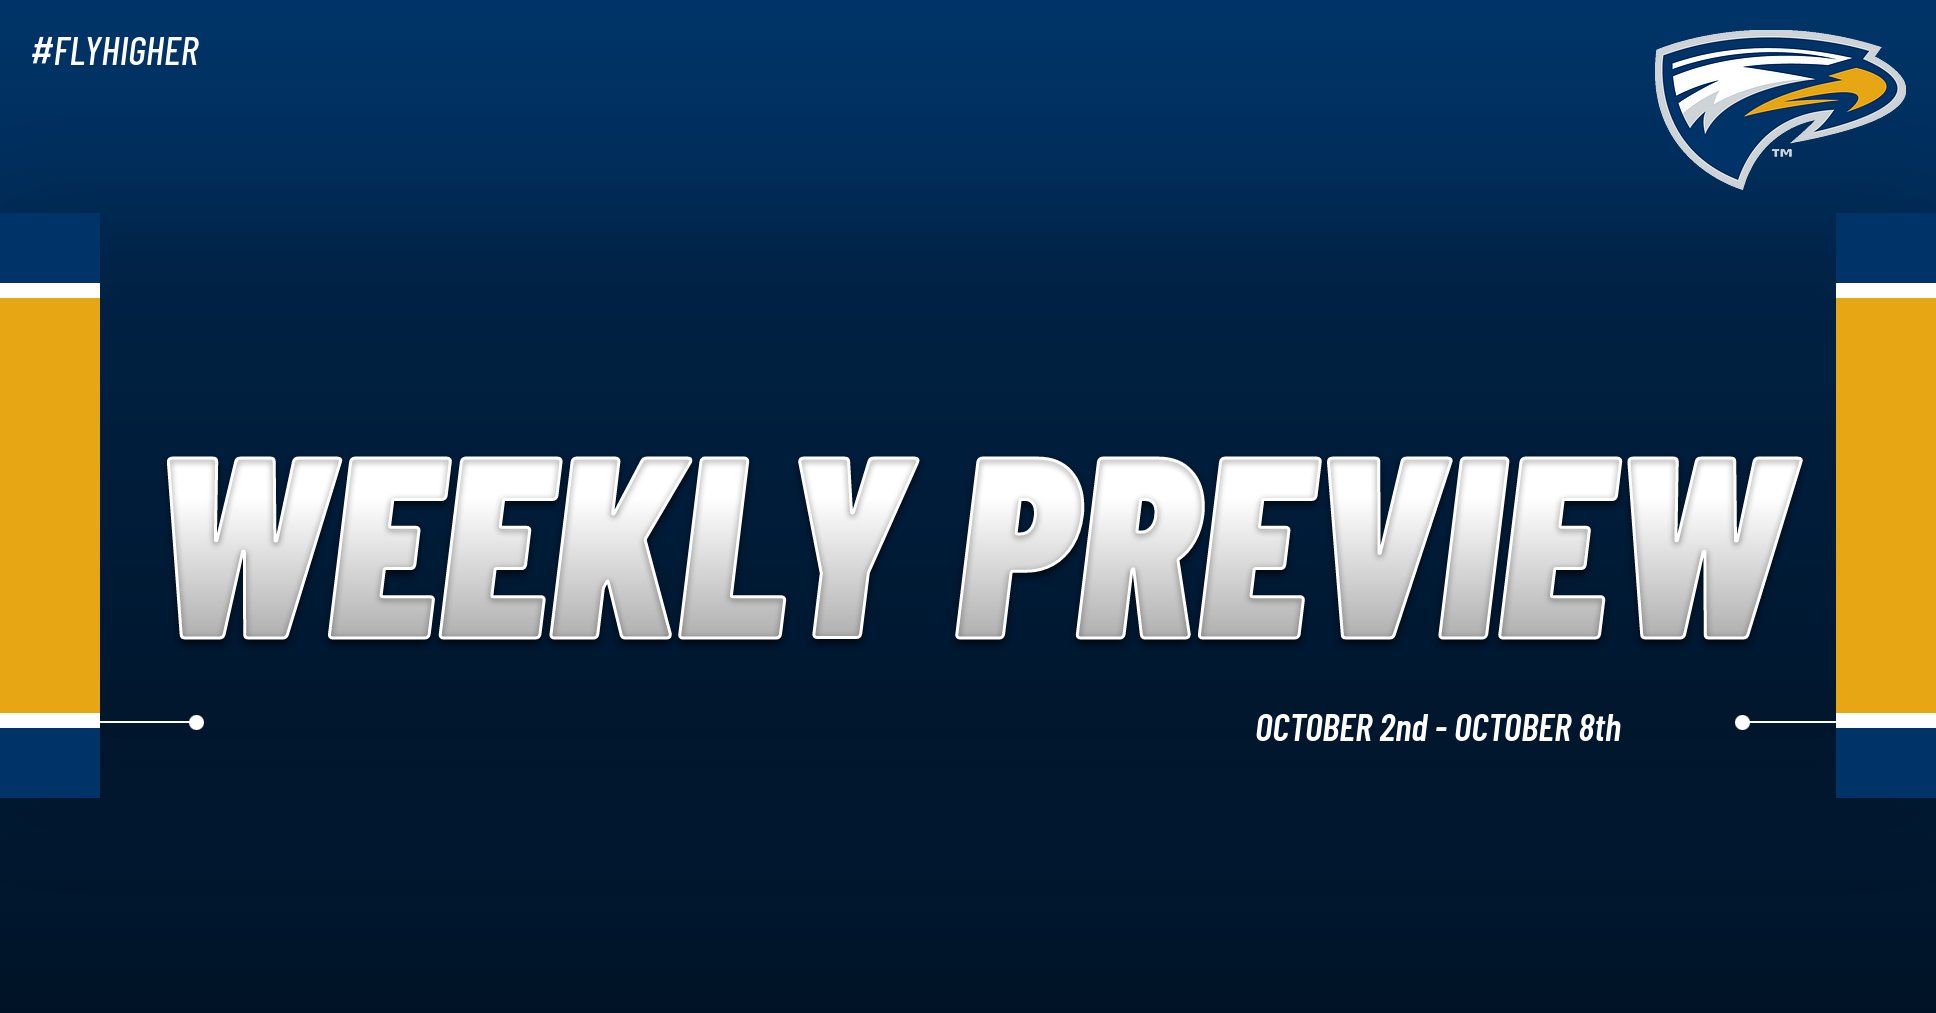 Emory Athletics Weekly Preview: October 2nd - October 8th